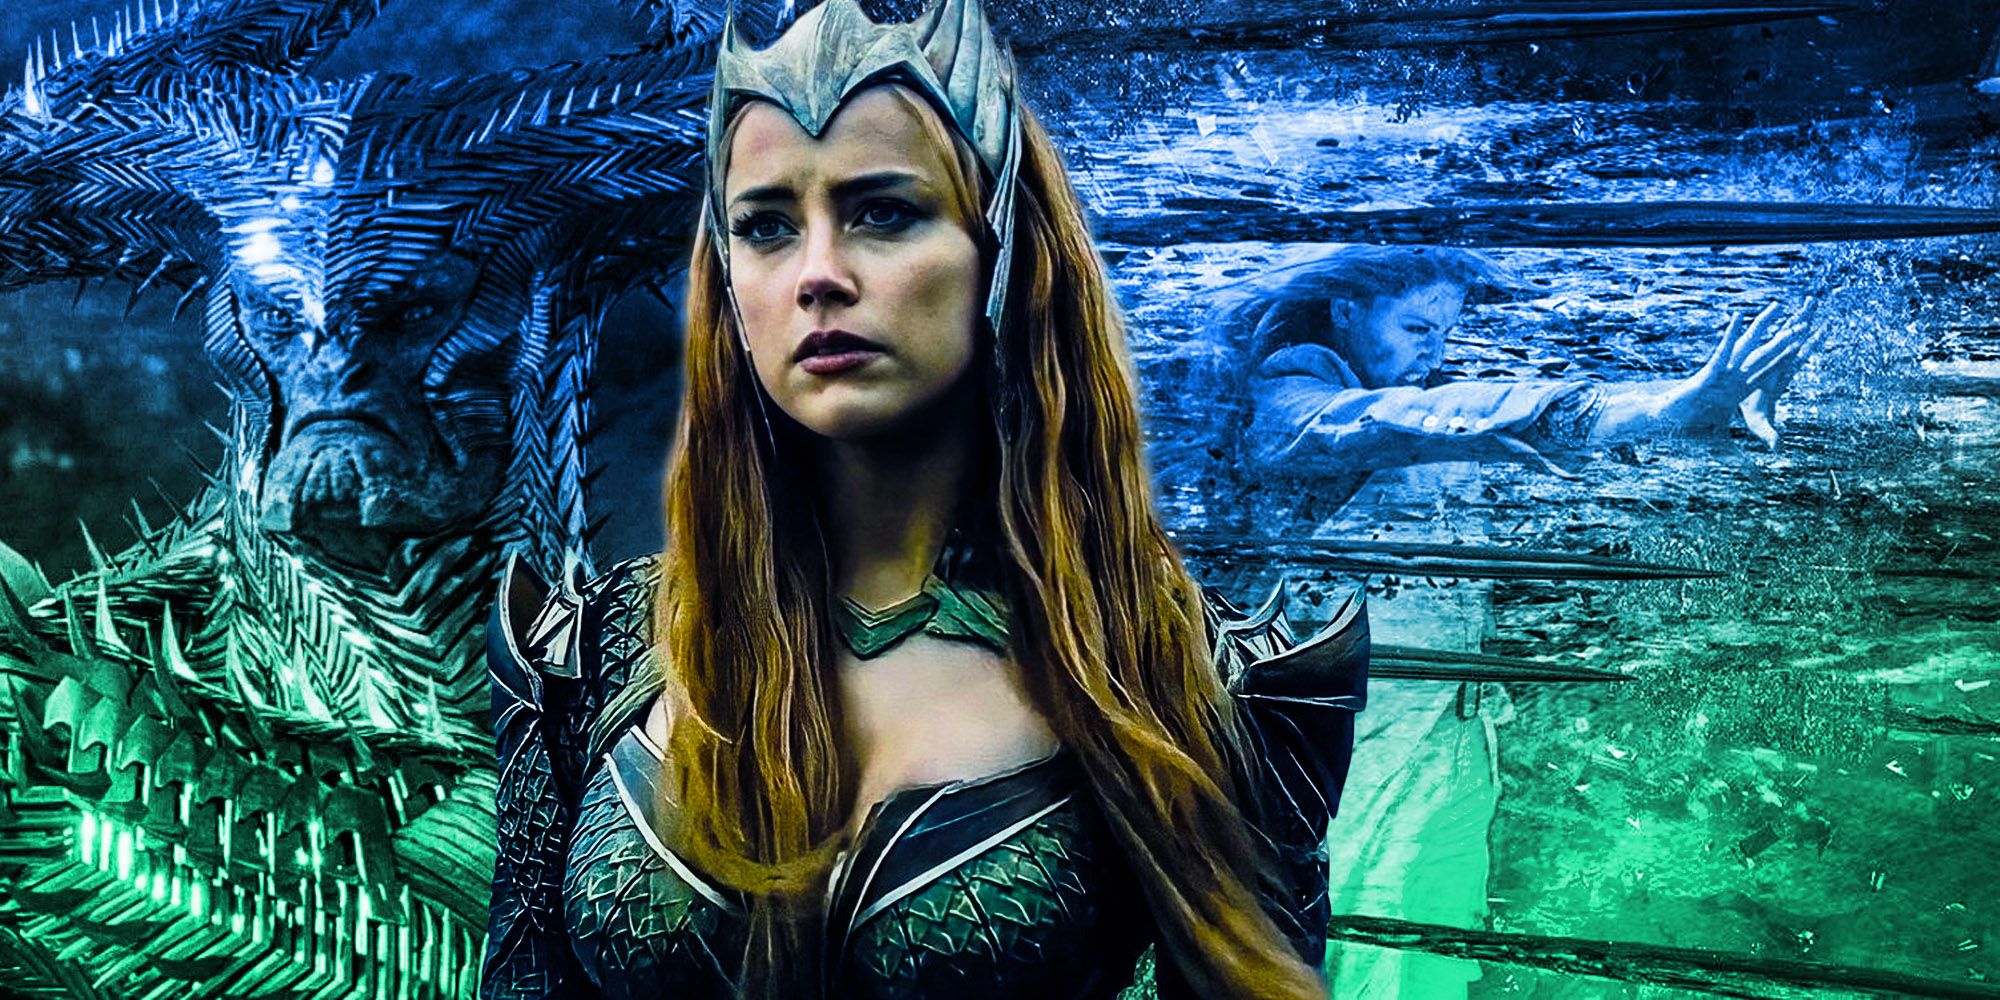 Mera Amber heard Coolest power introduced in Justice league snydercut aquaman steppenwolf